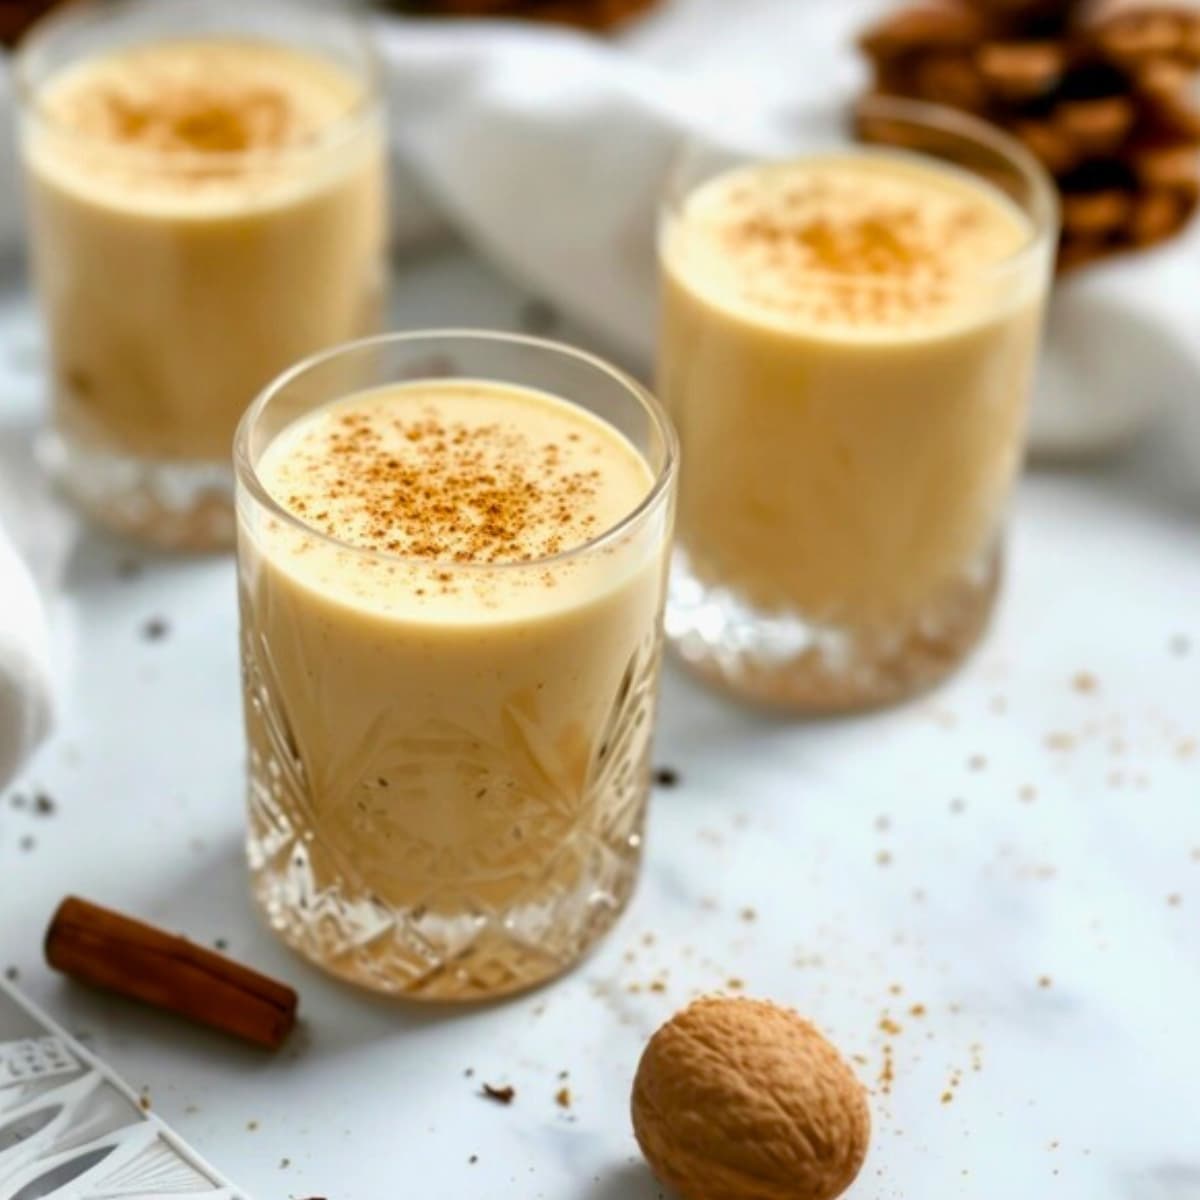 Three glasses of homemade eggnog on a white marble table garnished with grated nutmeg.